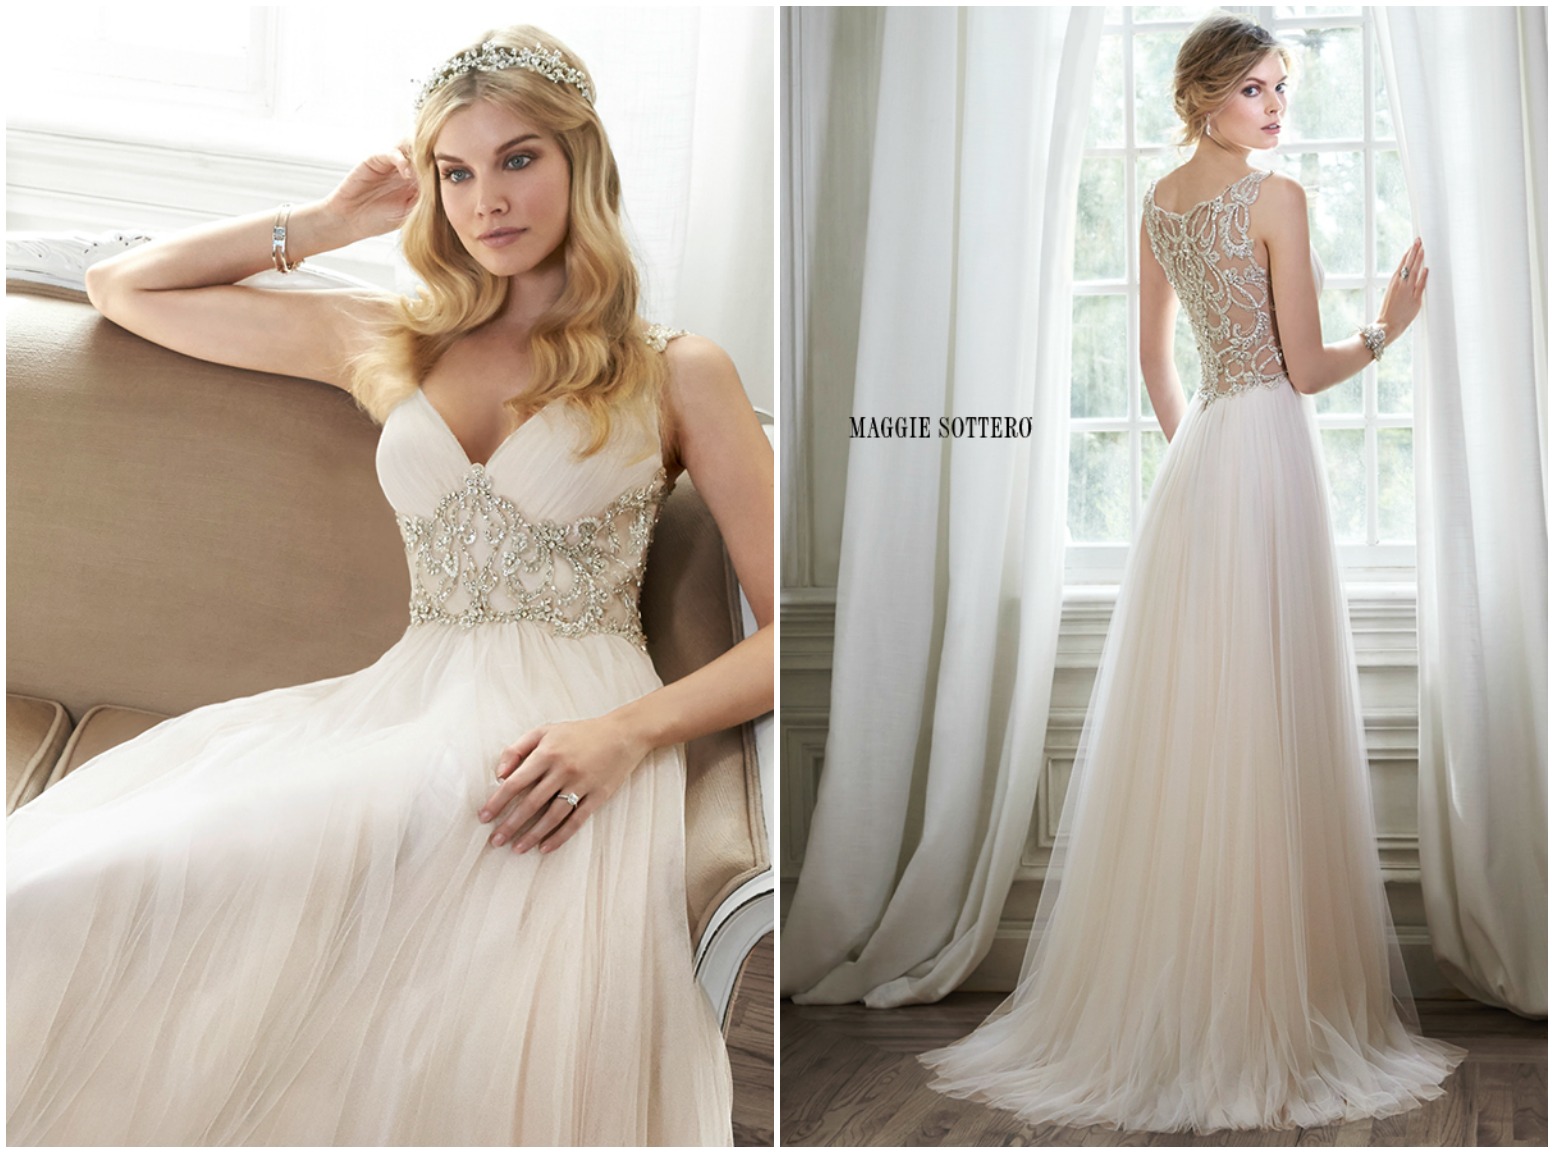 <a href="http://www.maggiesottero.com/dress.aspx?style=5MR054&amp;page=0&amp;pageSize=36&amp;keywordText=&amp;keywordType=All" target="_blank">Maggie Sottero</a>